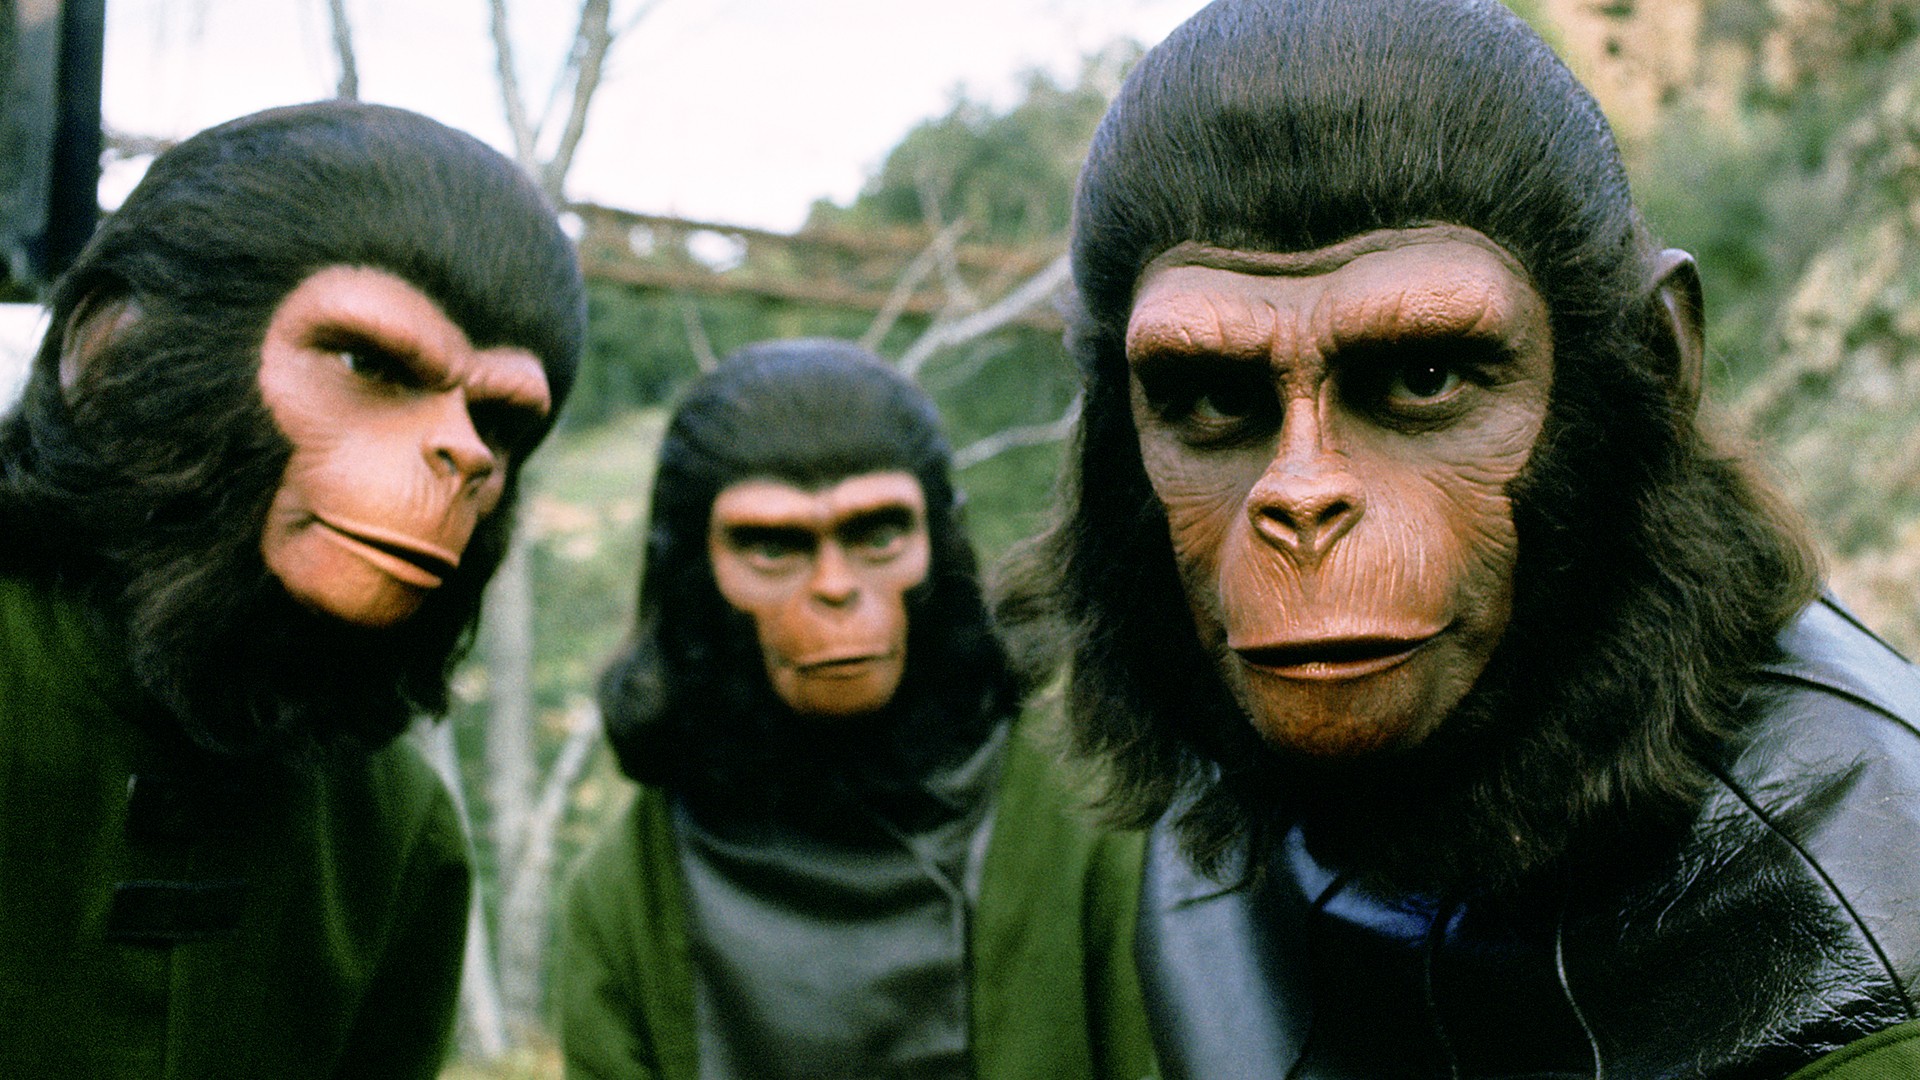 Classic Planet Of The Apes - 1920x1080 Wallpaper 